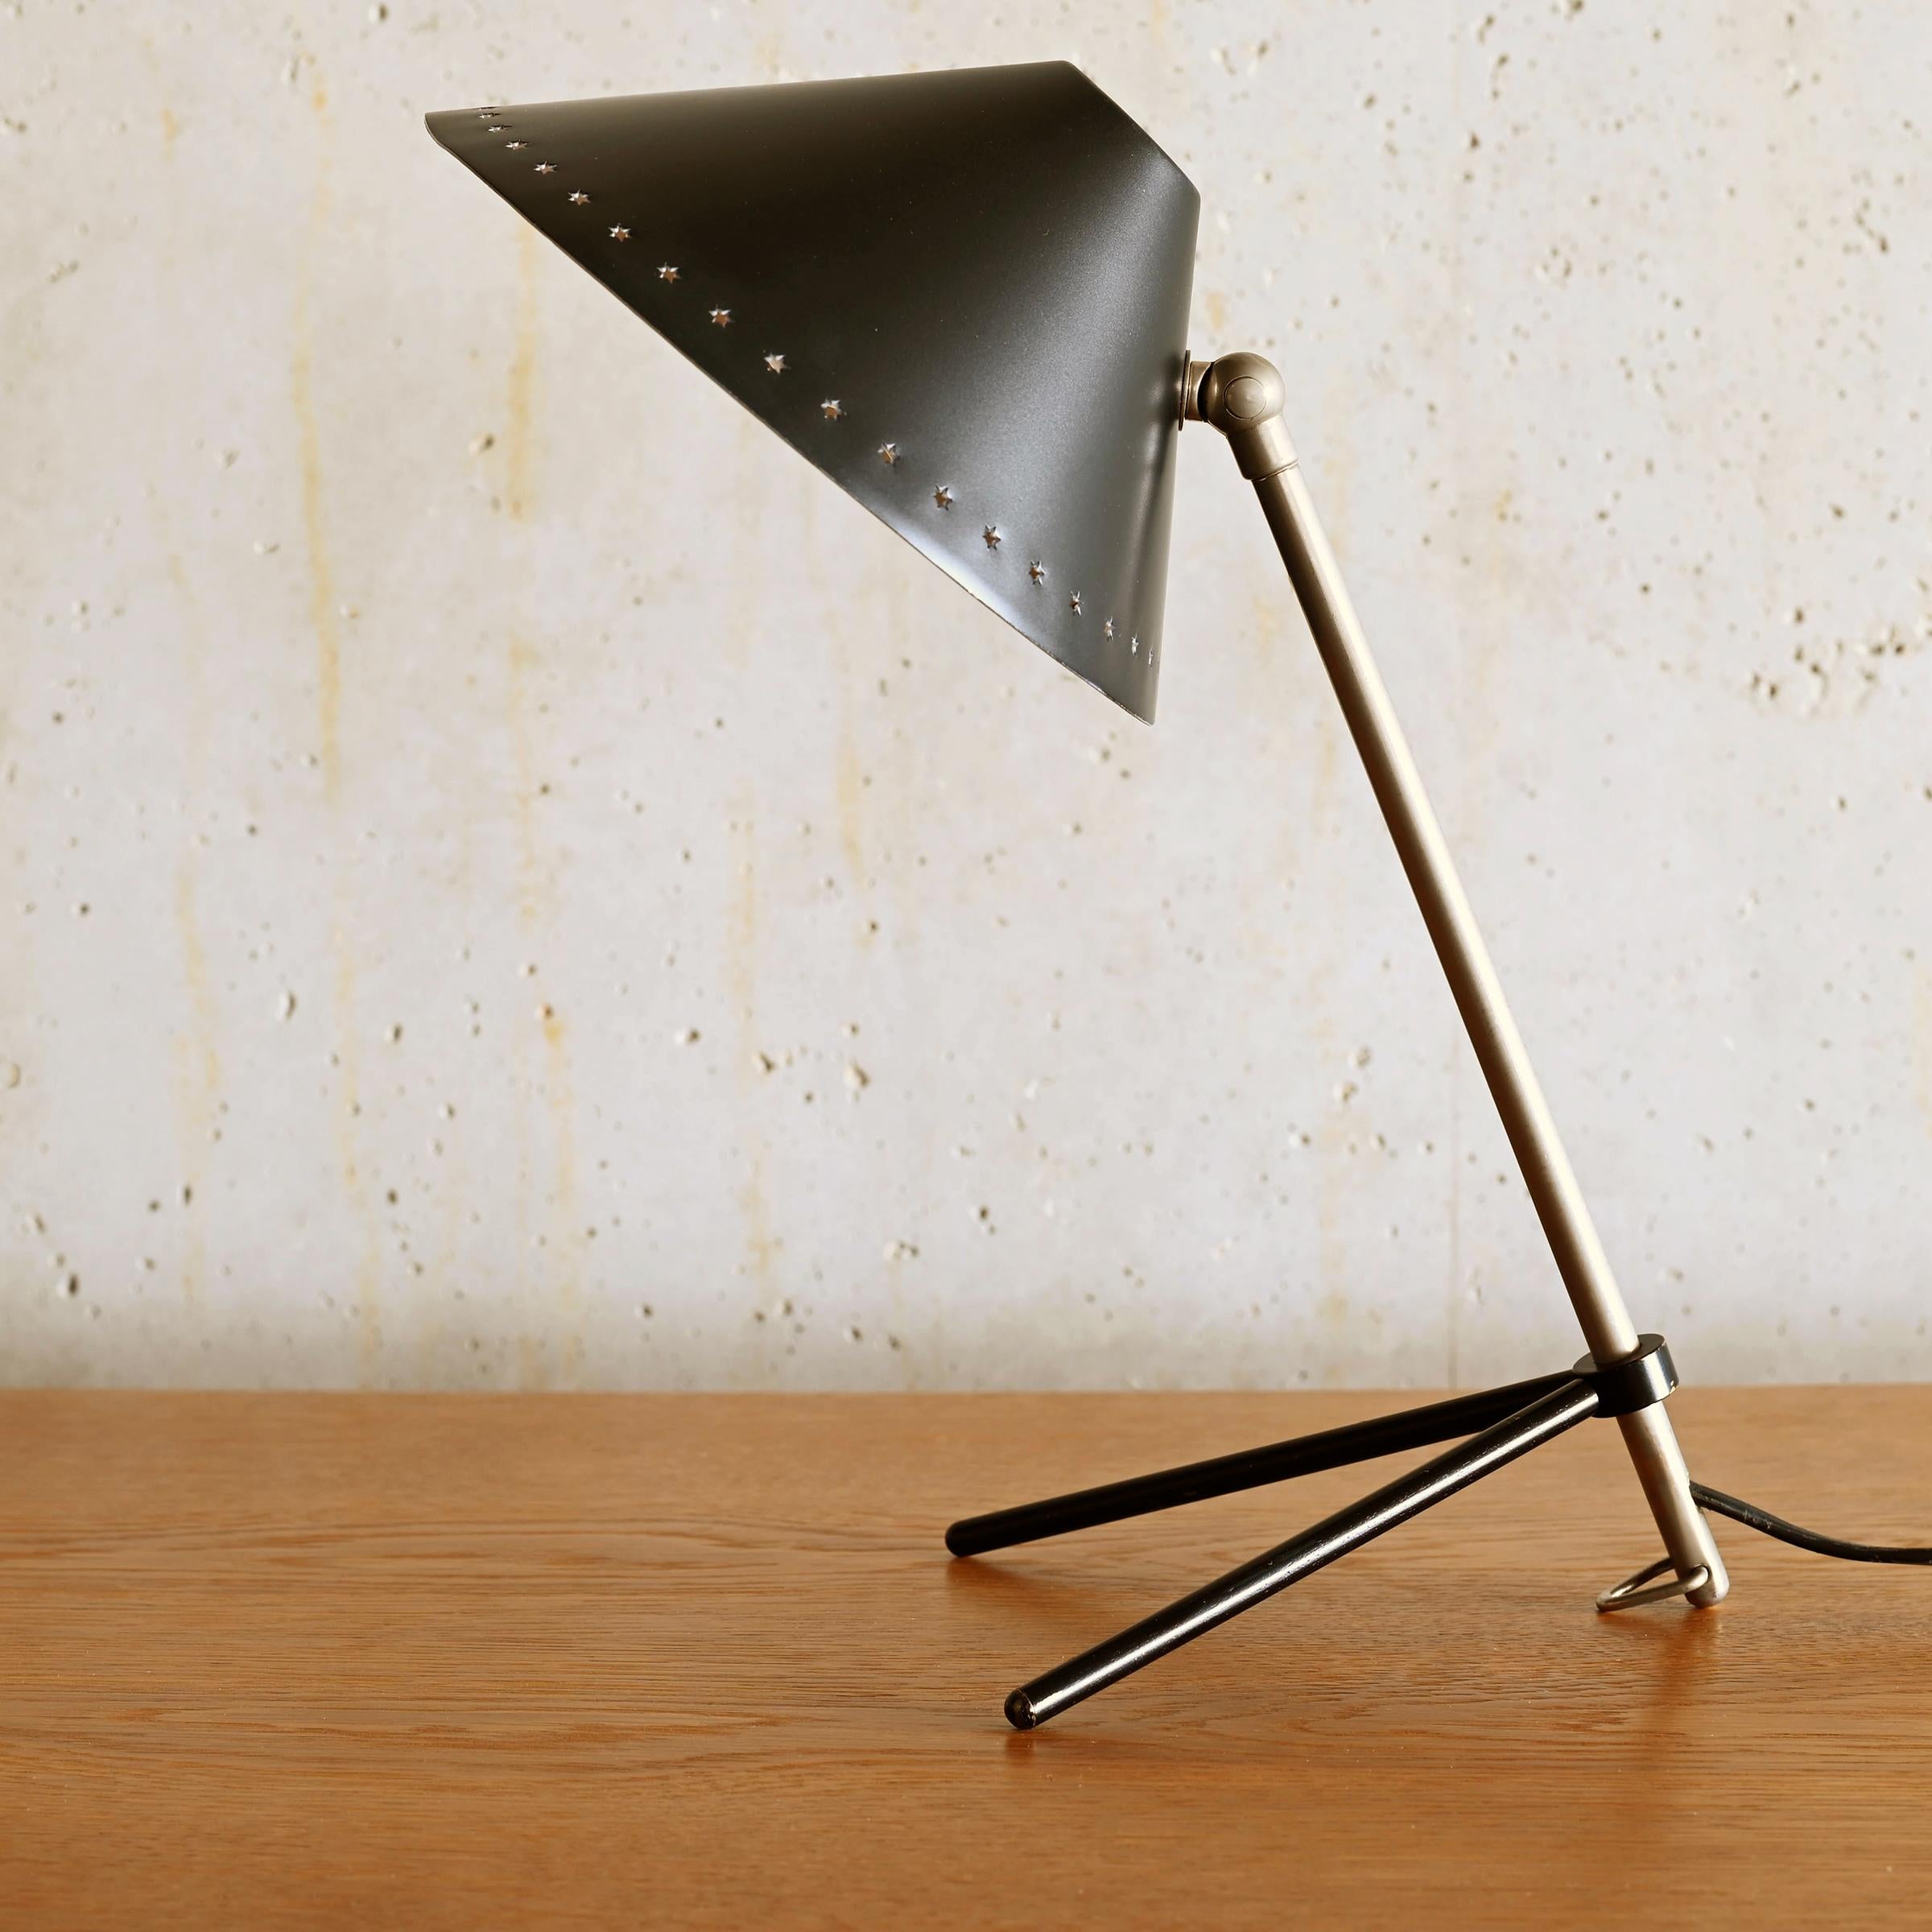 Aluminum Pinocchio Lamp with black shade by H. Busquet for Hala Zeist, Netherlands For Sale